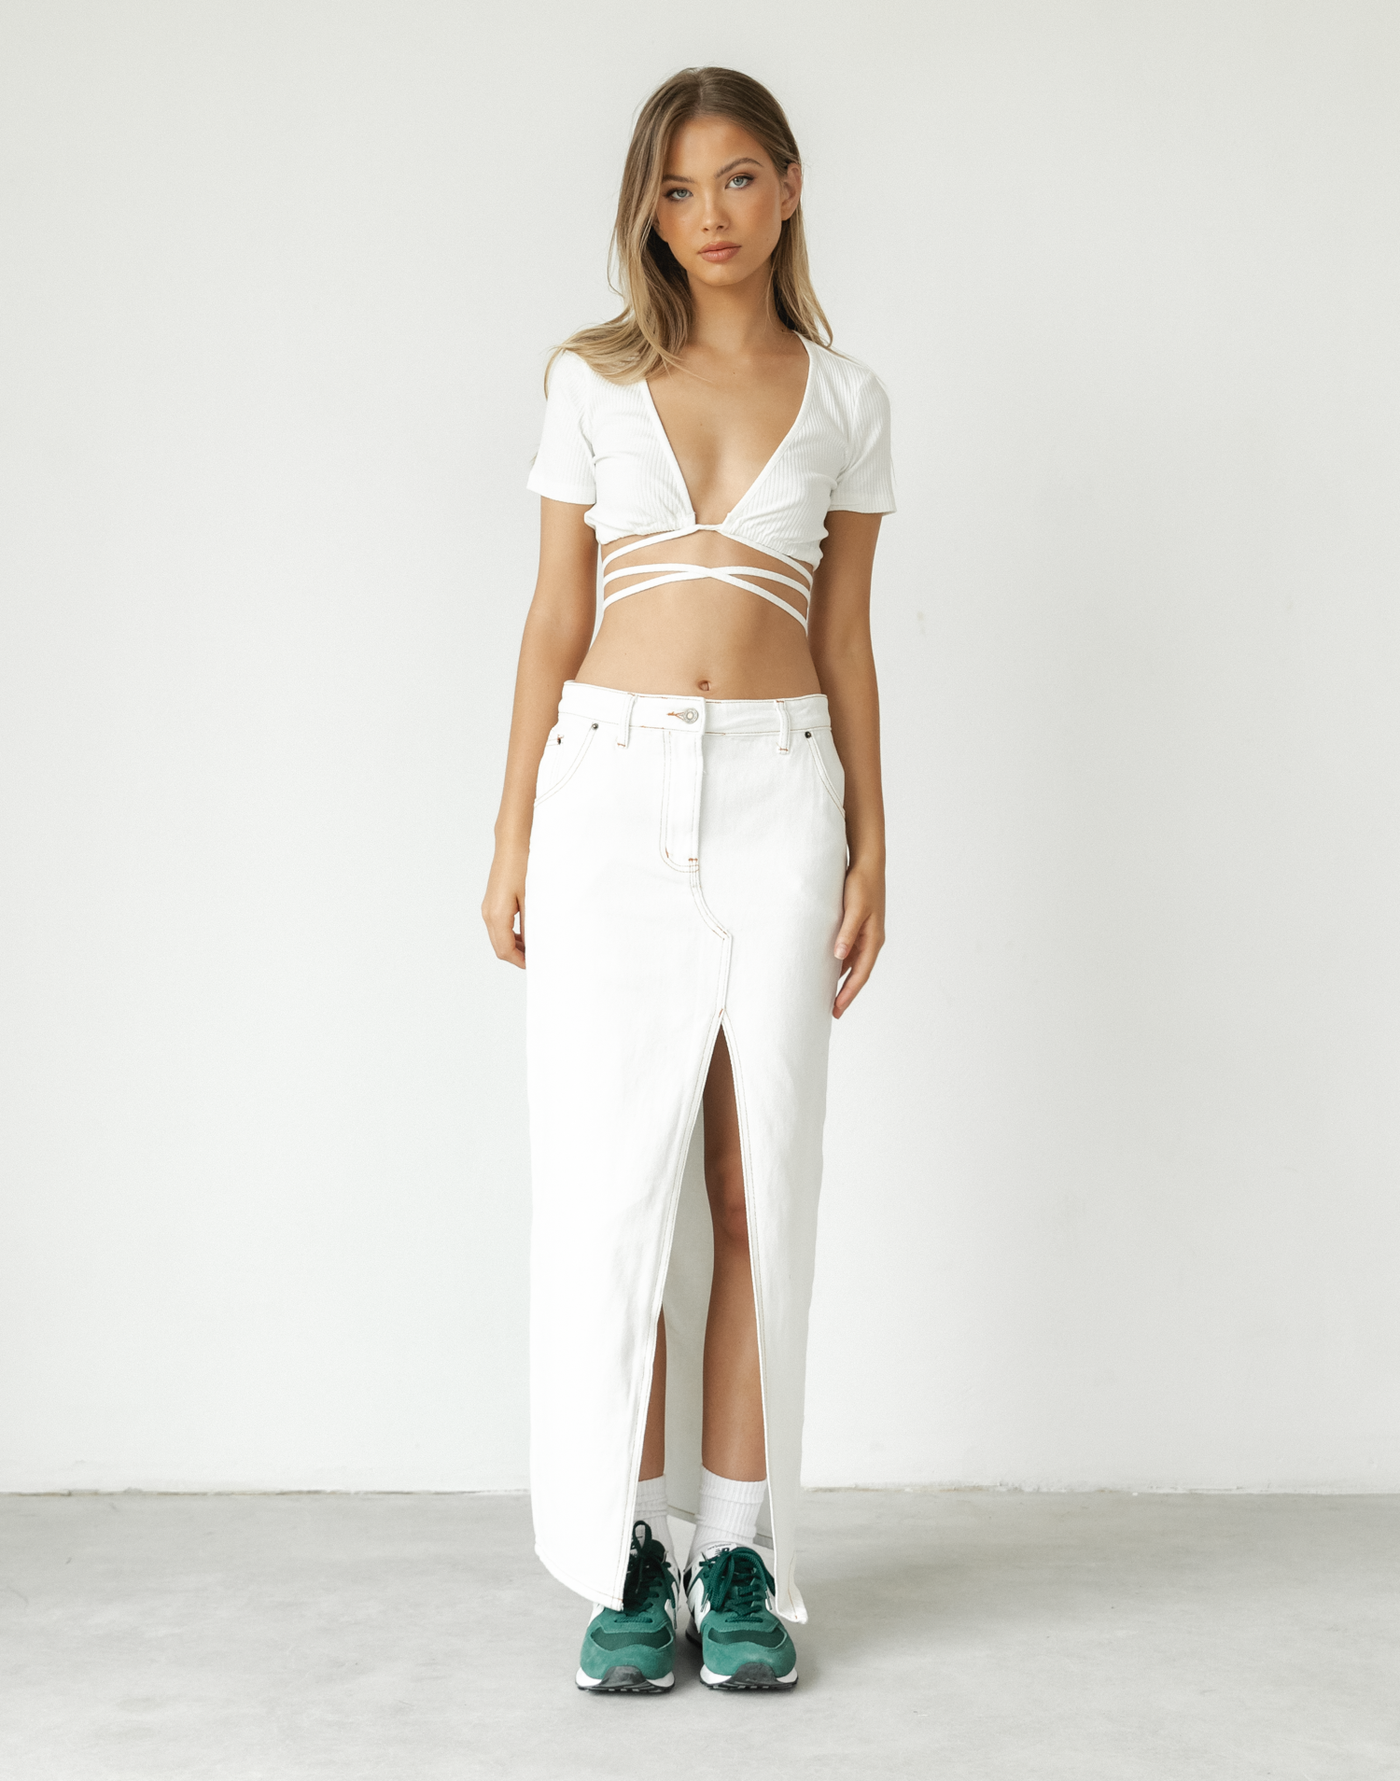 Flick Crop Top (White) - White Ribbed Crop Top - Women's Top - Charcoal Clothing